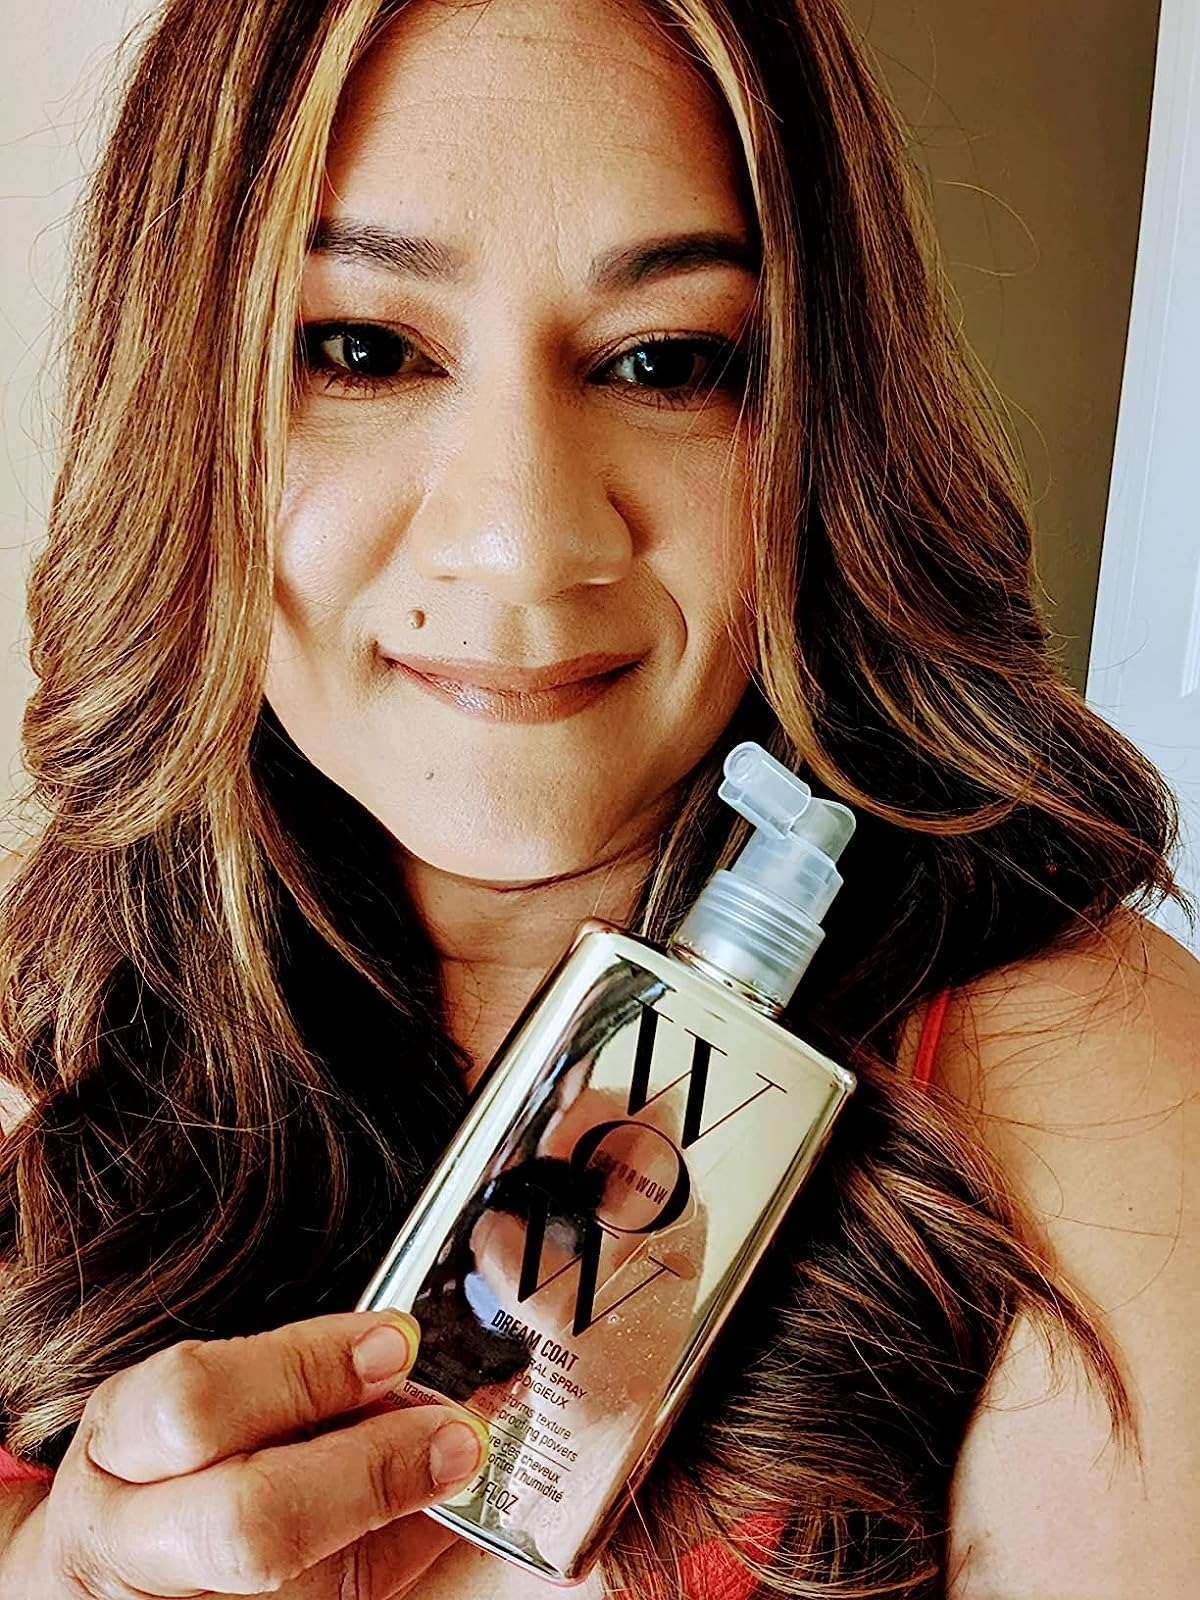 reviewer with shiny brown highlighted hair holding a bottle of the hair treatment